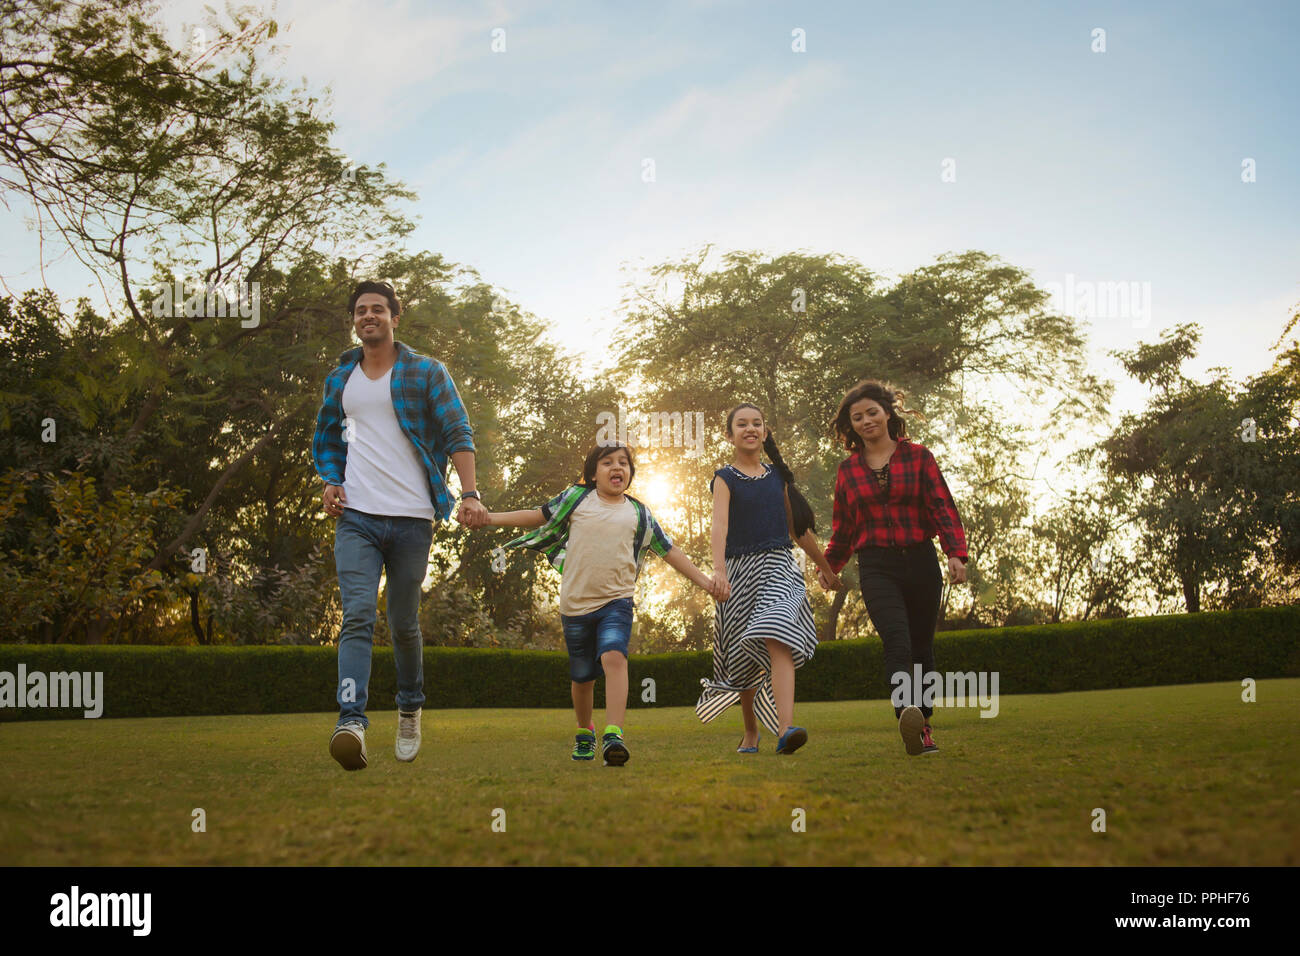 Happy family of man woman son and daughter walking in park holding hands. Stock Photo